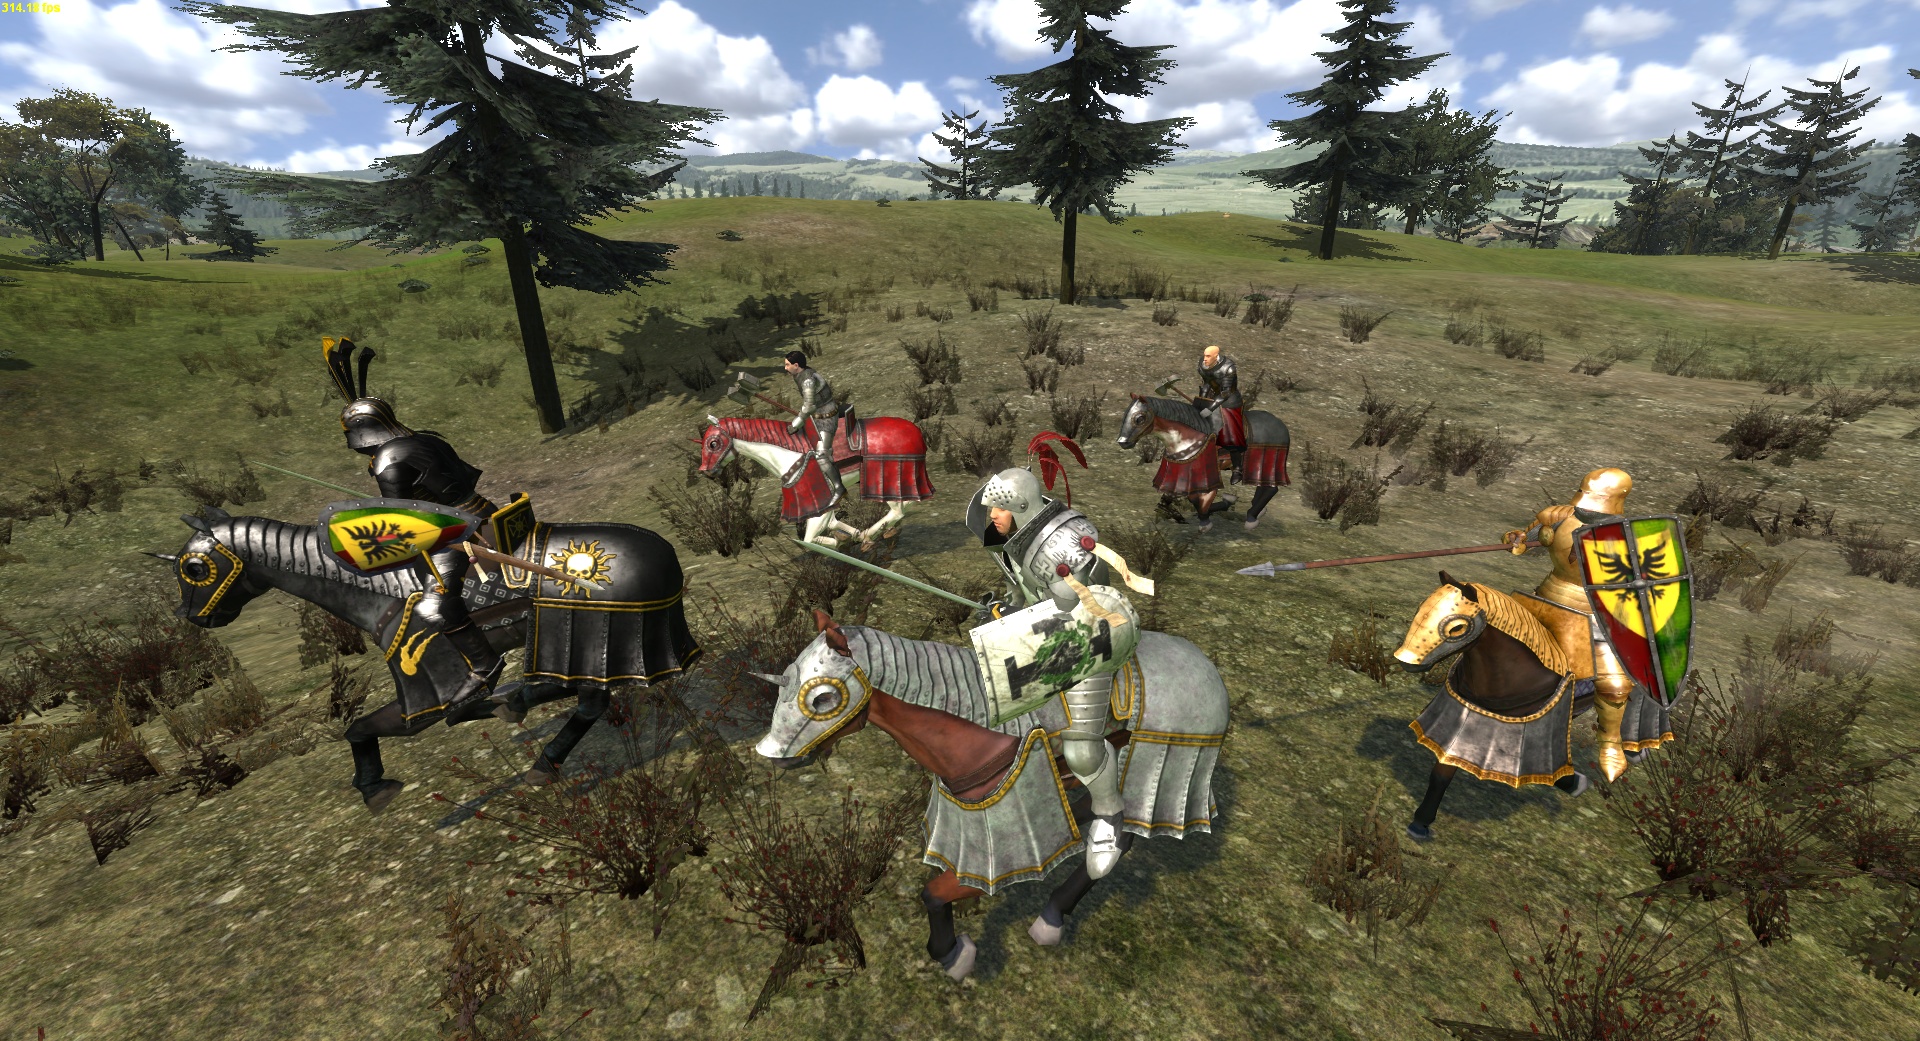 Warband warsword conquest. Warsword Conquest. Маунт блейд вархаммер. Mount and Blade Warsword Conquest. Mount and Blade Warband Warsword Conquest.